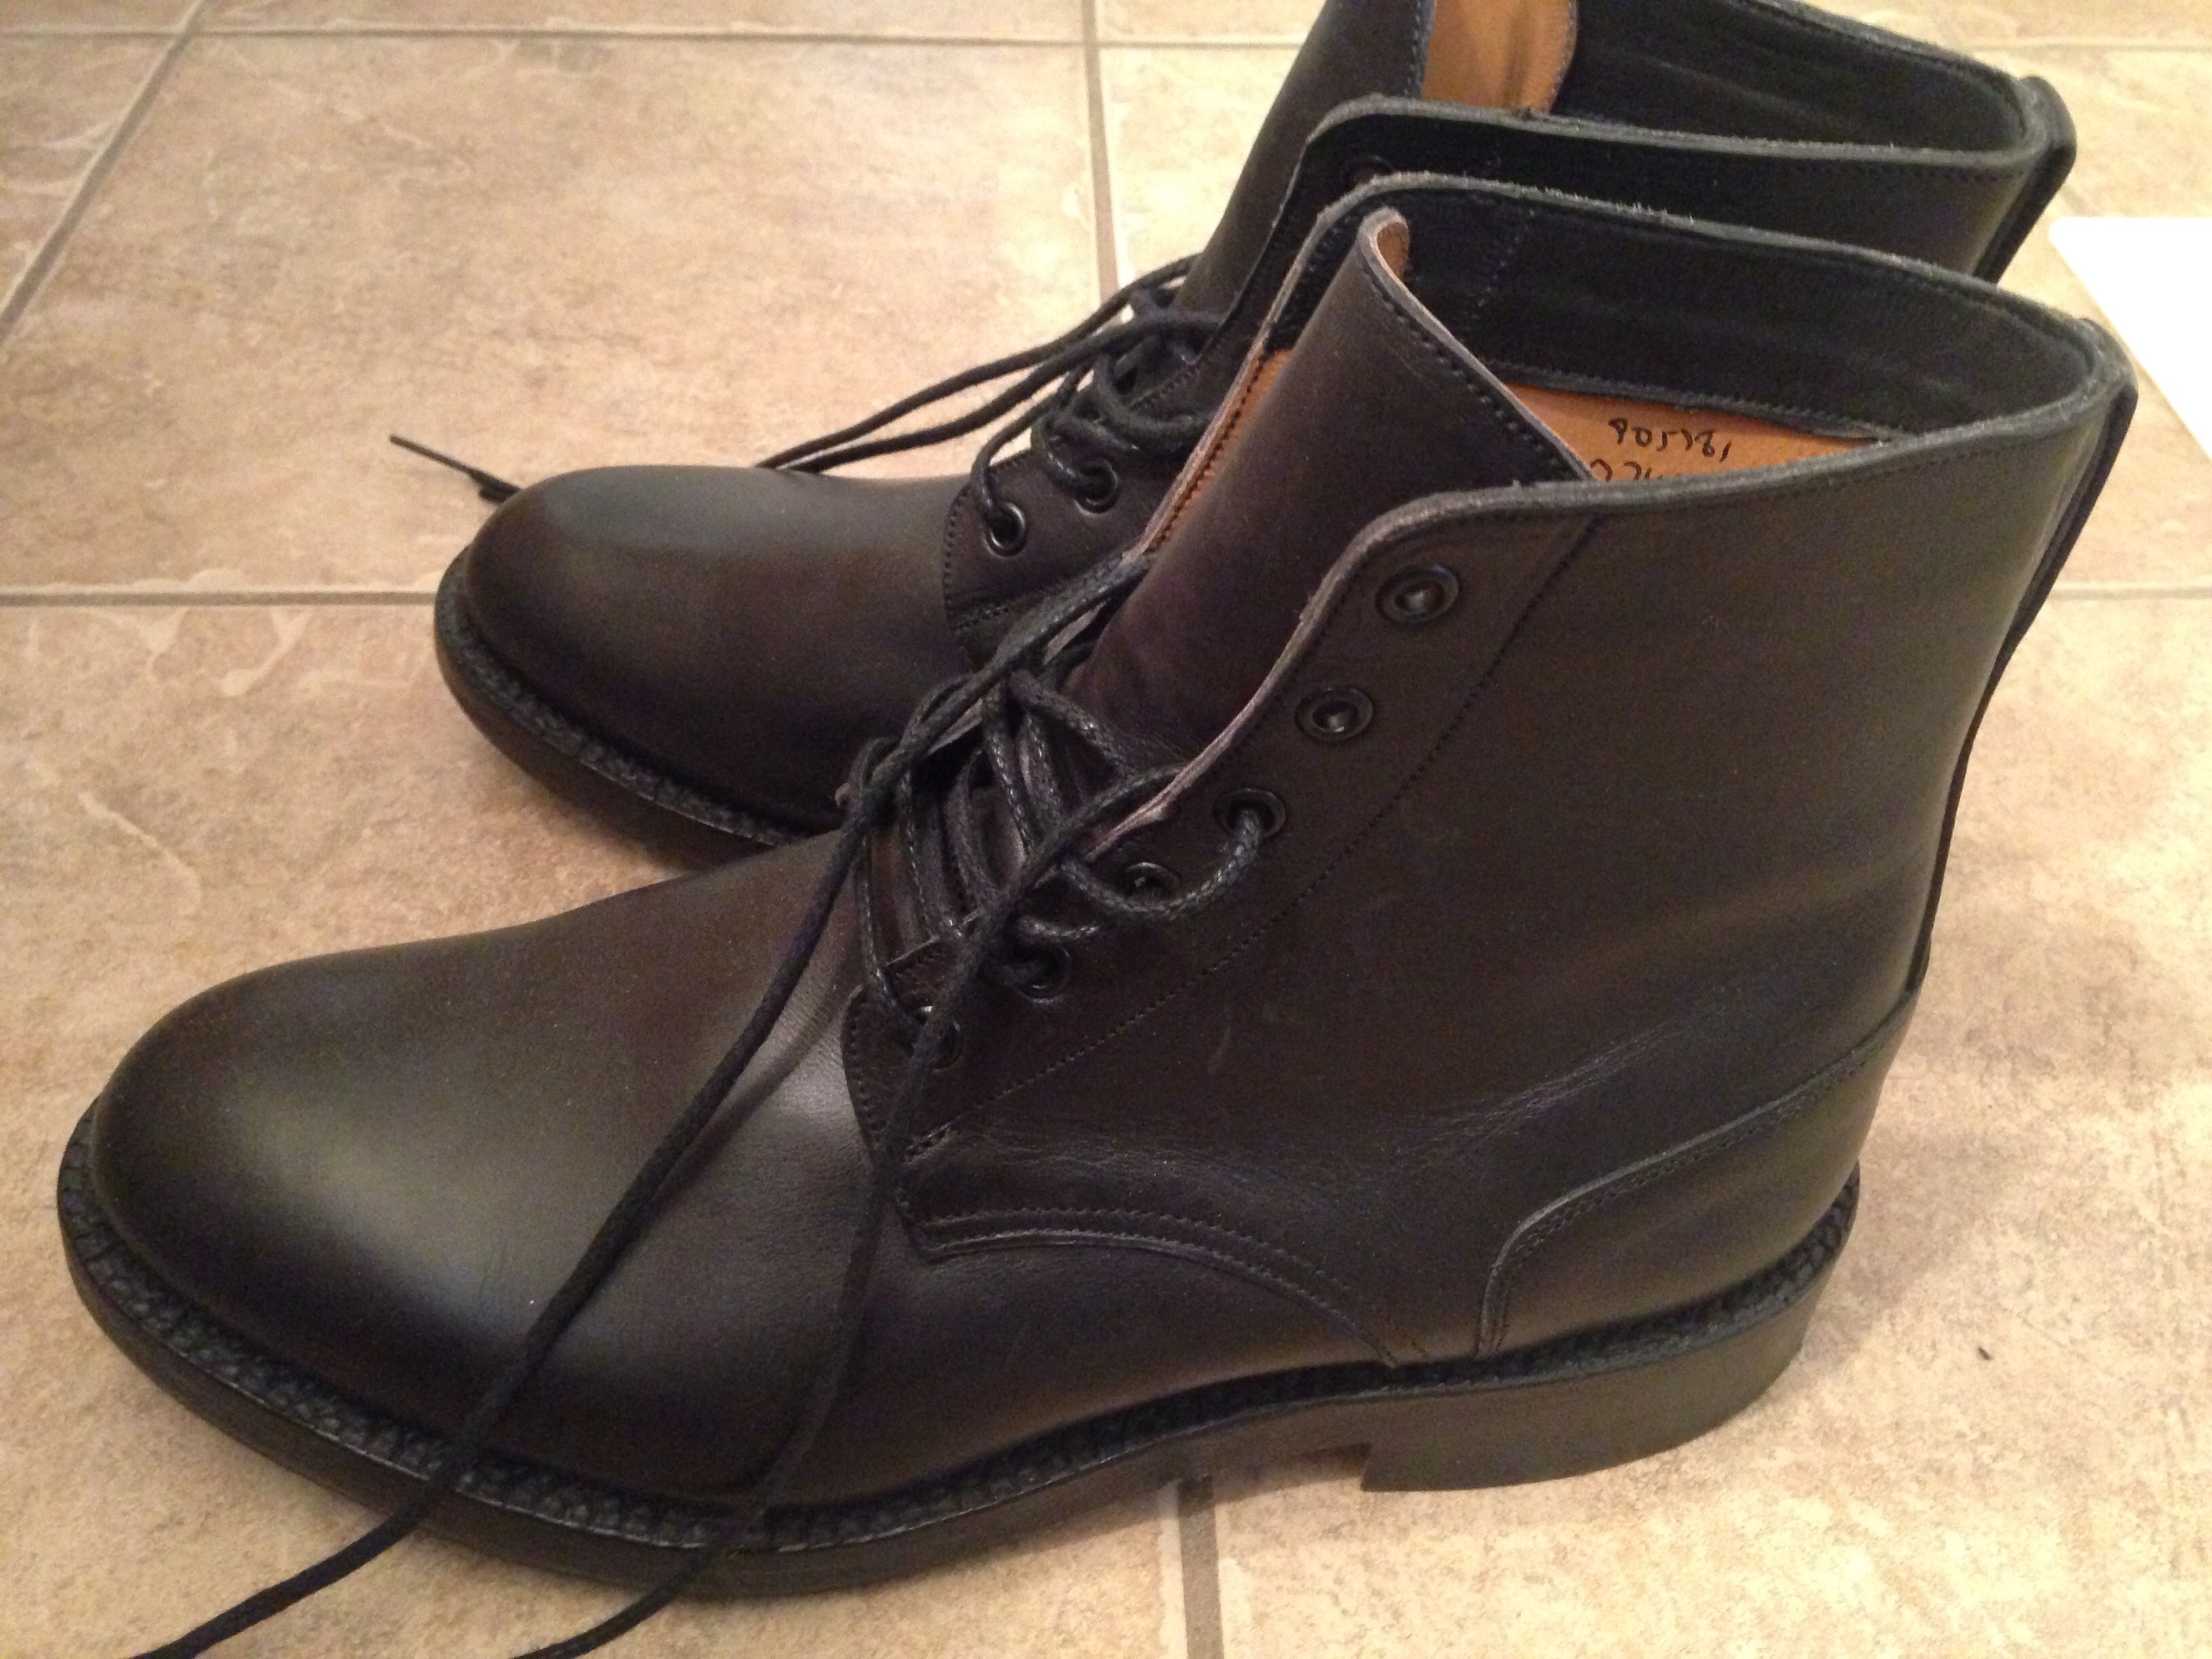 Offical TRICKERS shoes and boots thread | Page 260 | Styleforum